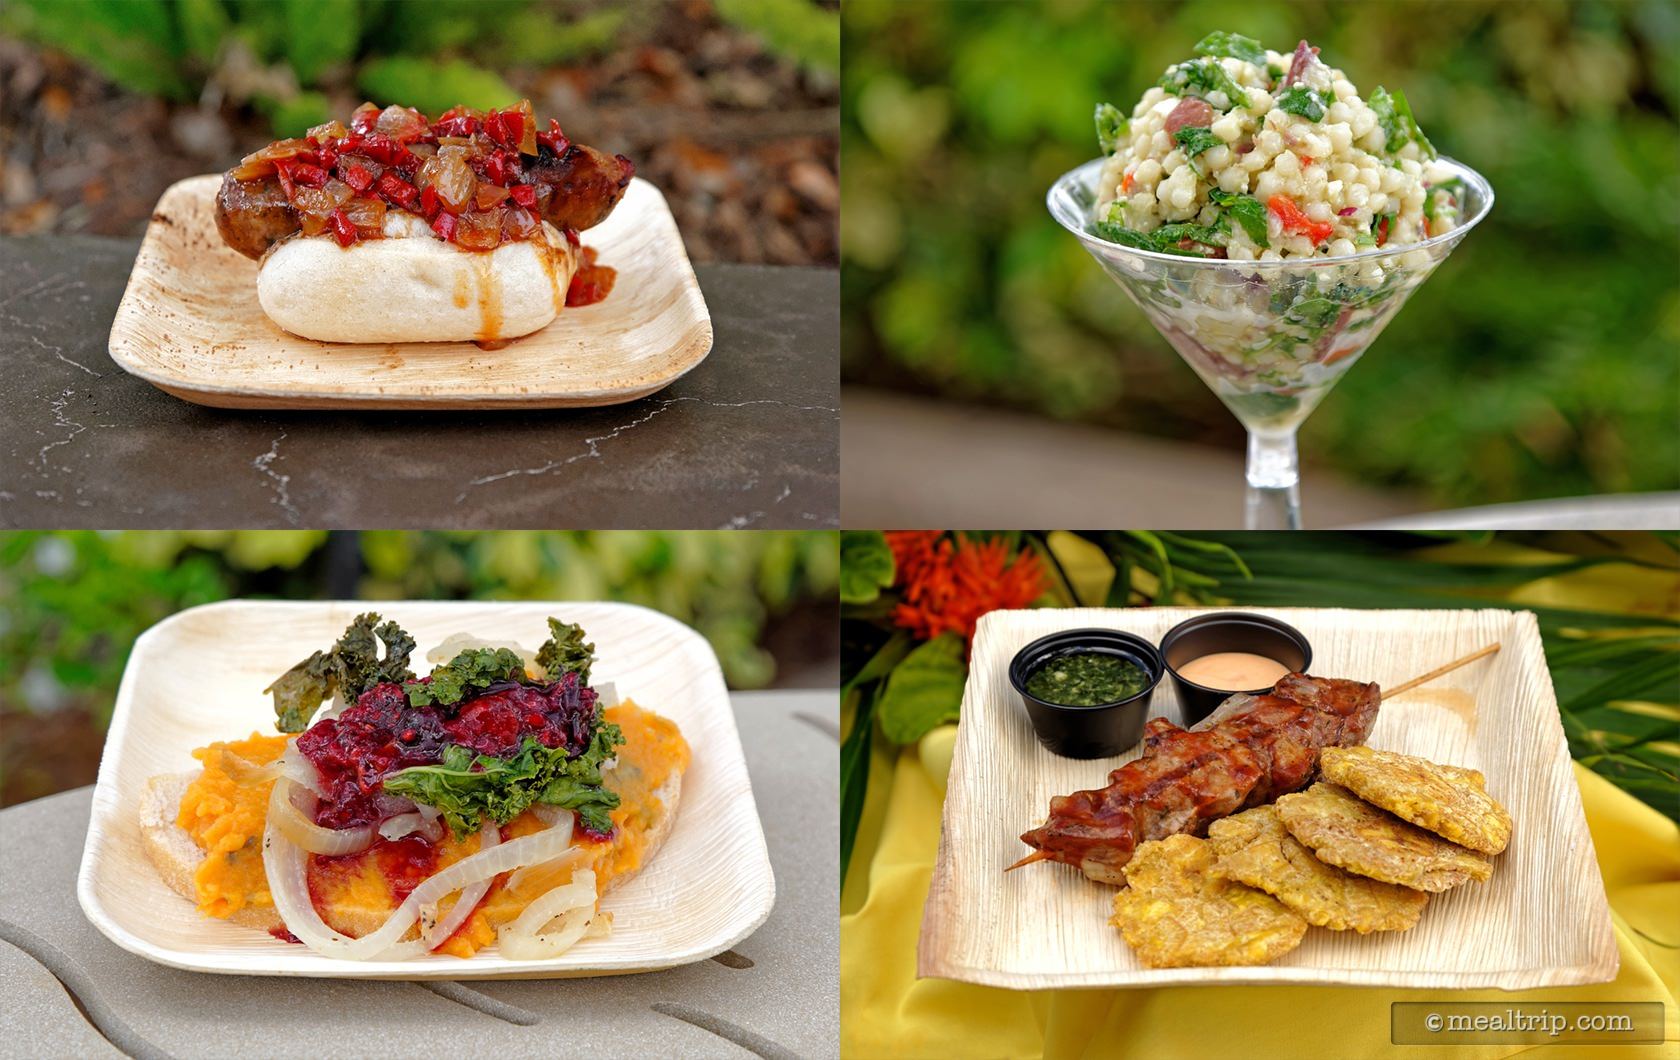 Seven Seas Food Festival Menu Items and Prices for 2018 (Text List)